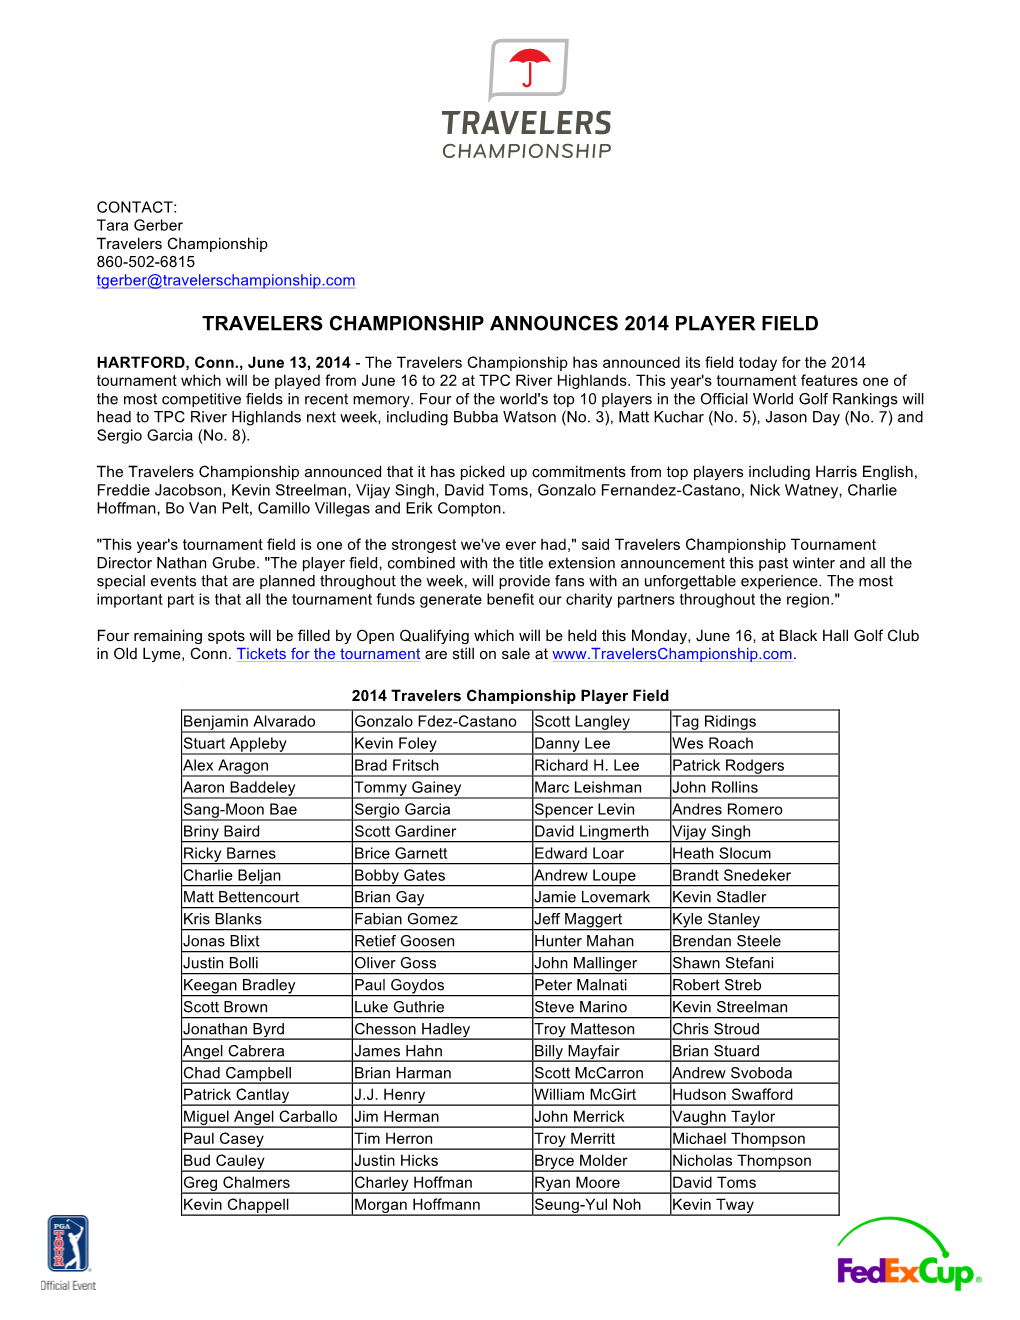 Travelers Championship Announces 2014 Player Field